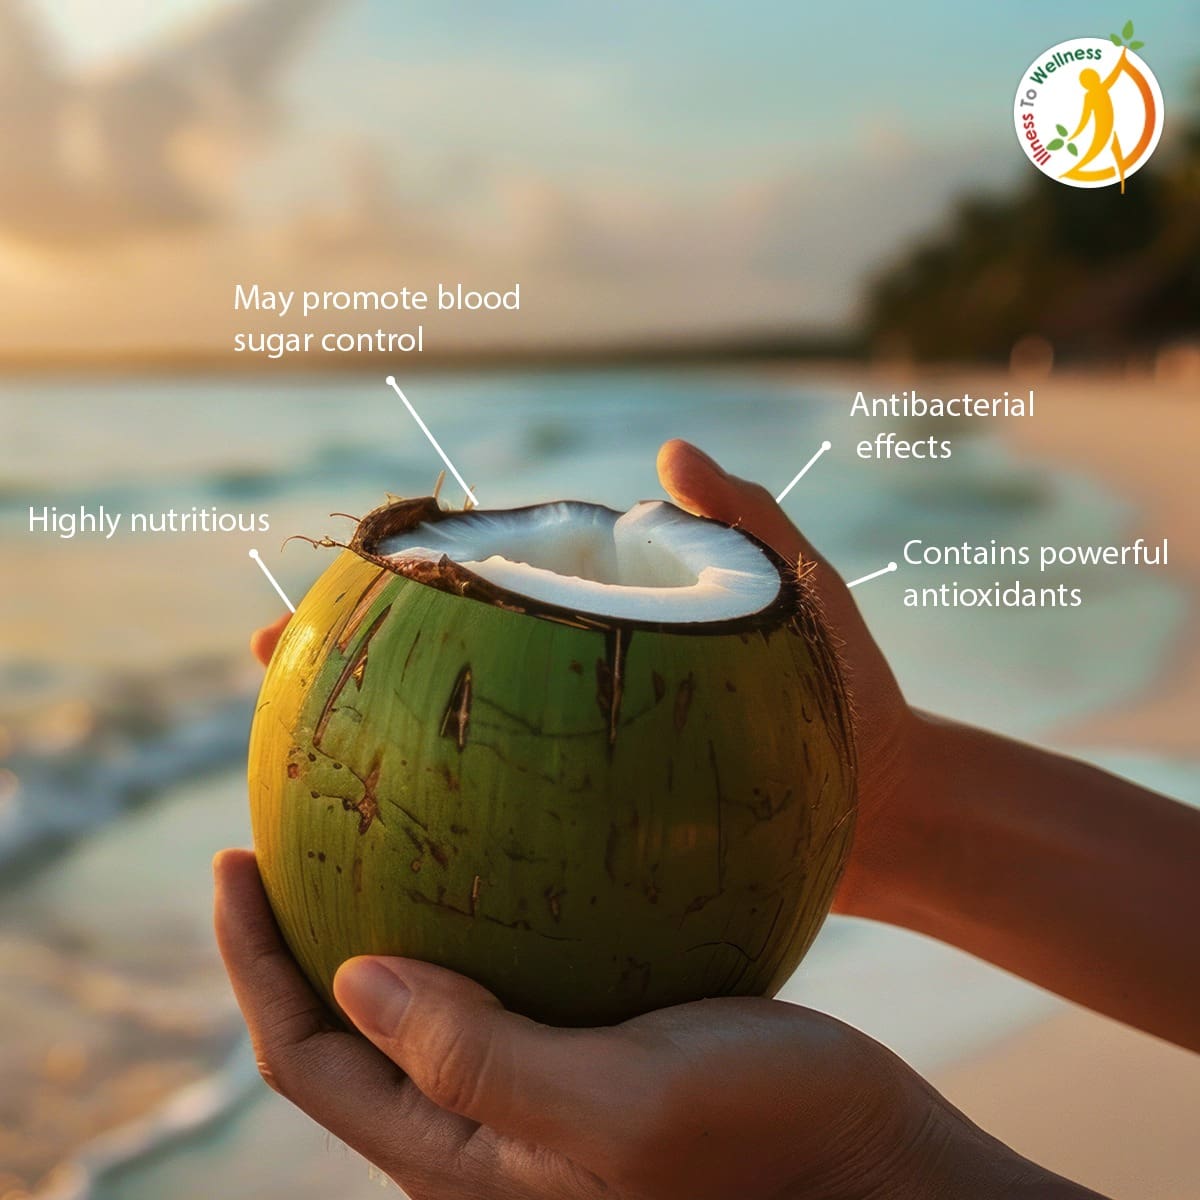 Coconut Water: Nature's Hydration Booster and Health Ally
.
#IllnessToWellness #HealthBenefits #CoconutWater #Health #LifestyleHabits #fyp #explore